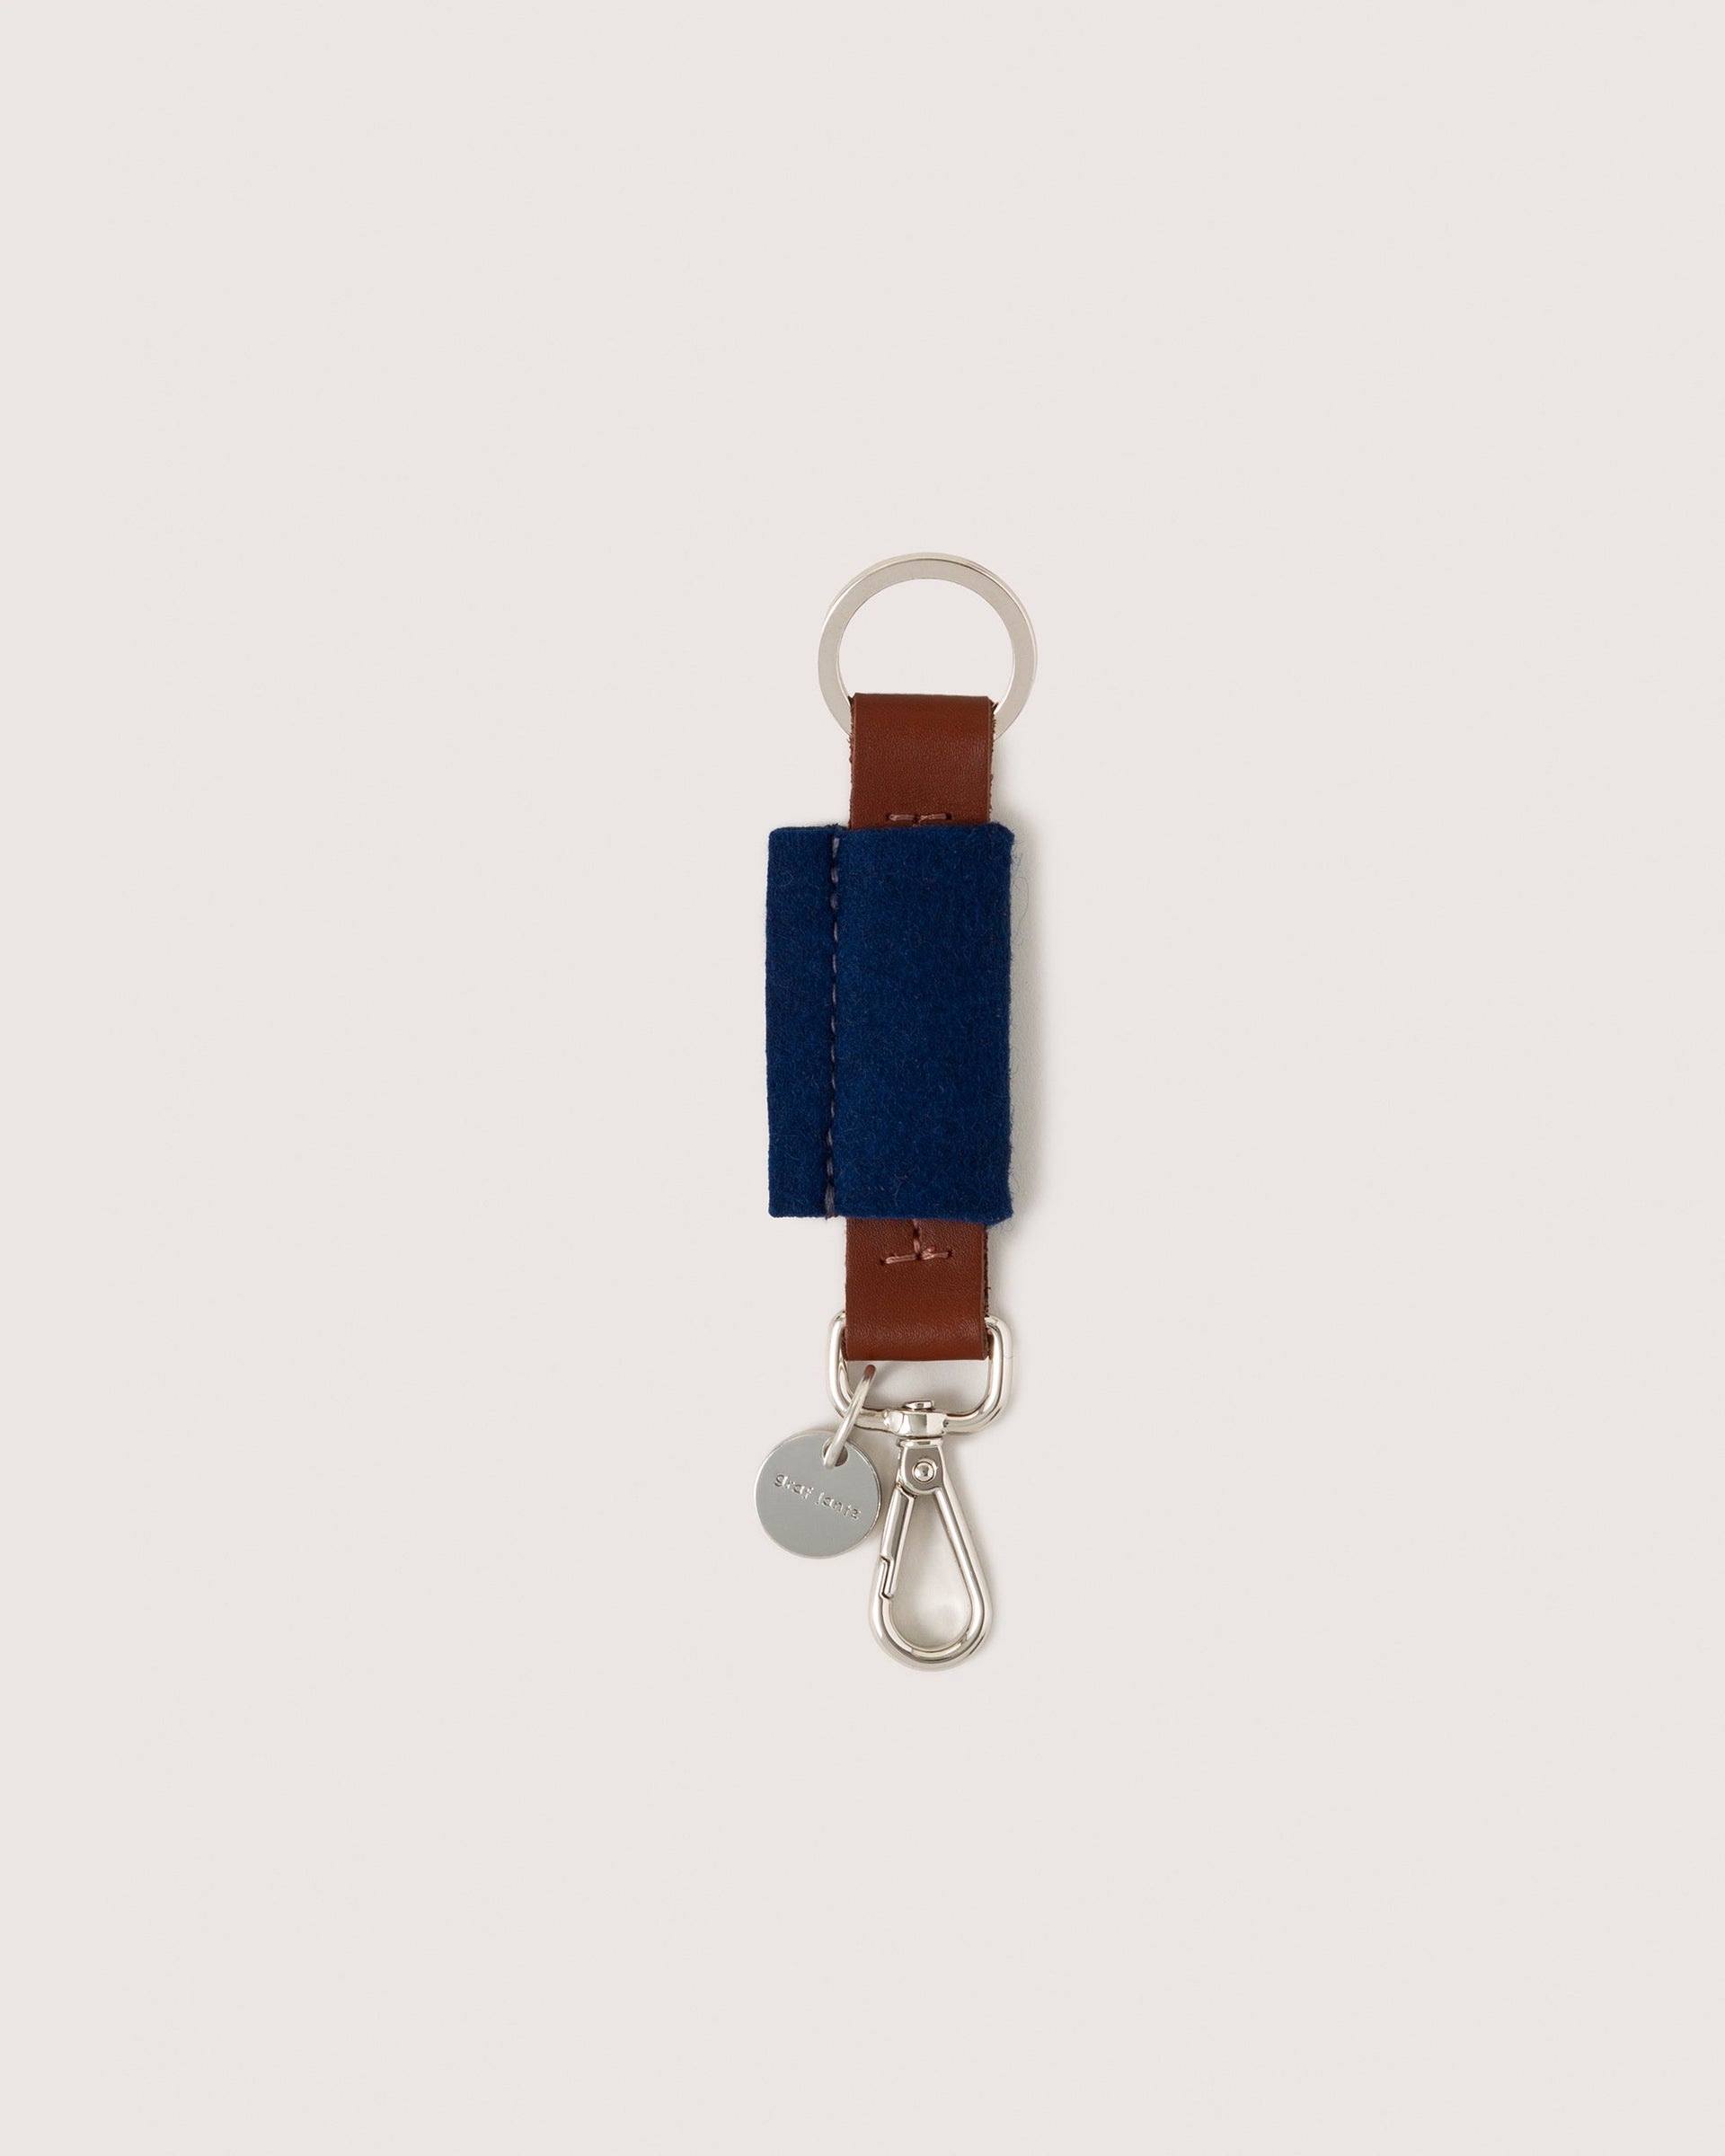 Merino Wool Bar Key Fob in blue with silver colored key ring, lobster clasp, and brand logo in brown leather, white background.